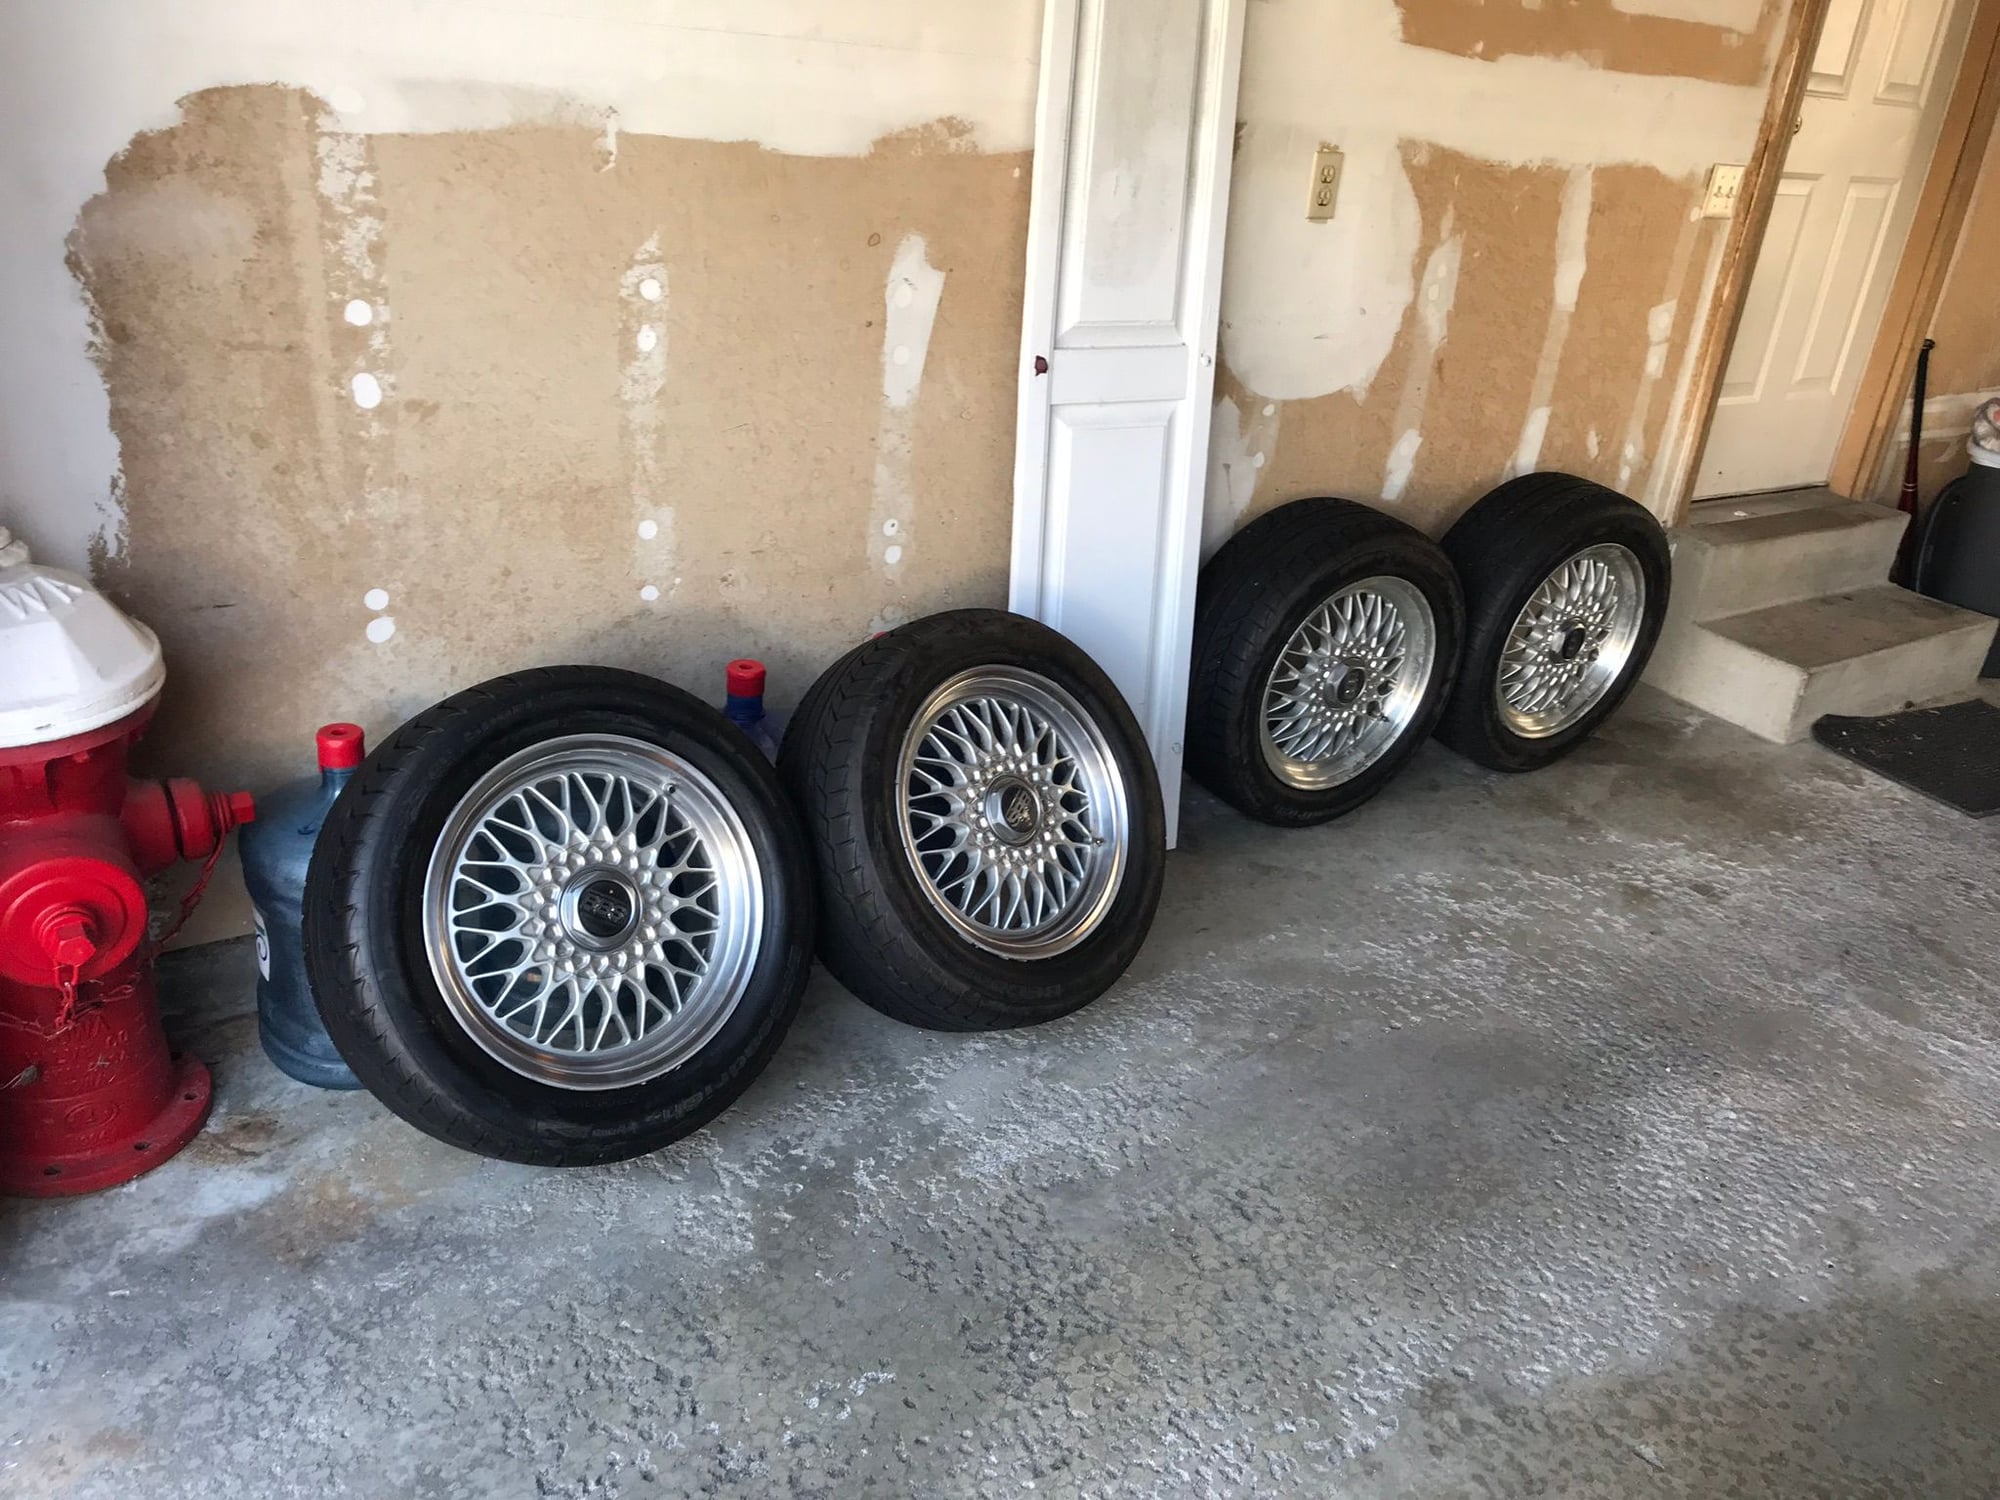 Wheels and Tires/Axles - Fc3s infini wheels 16x7 40 offset - Used - St. Louis, MO 63114, United States